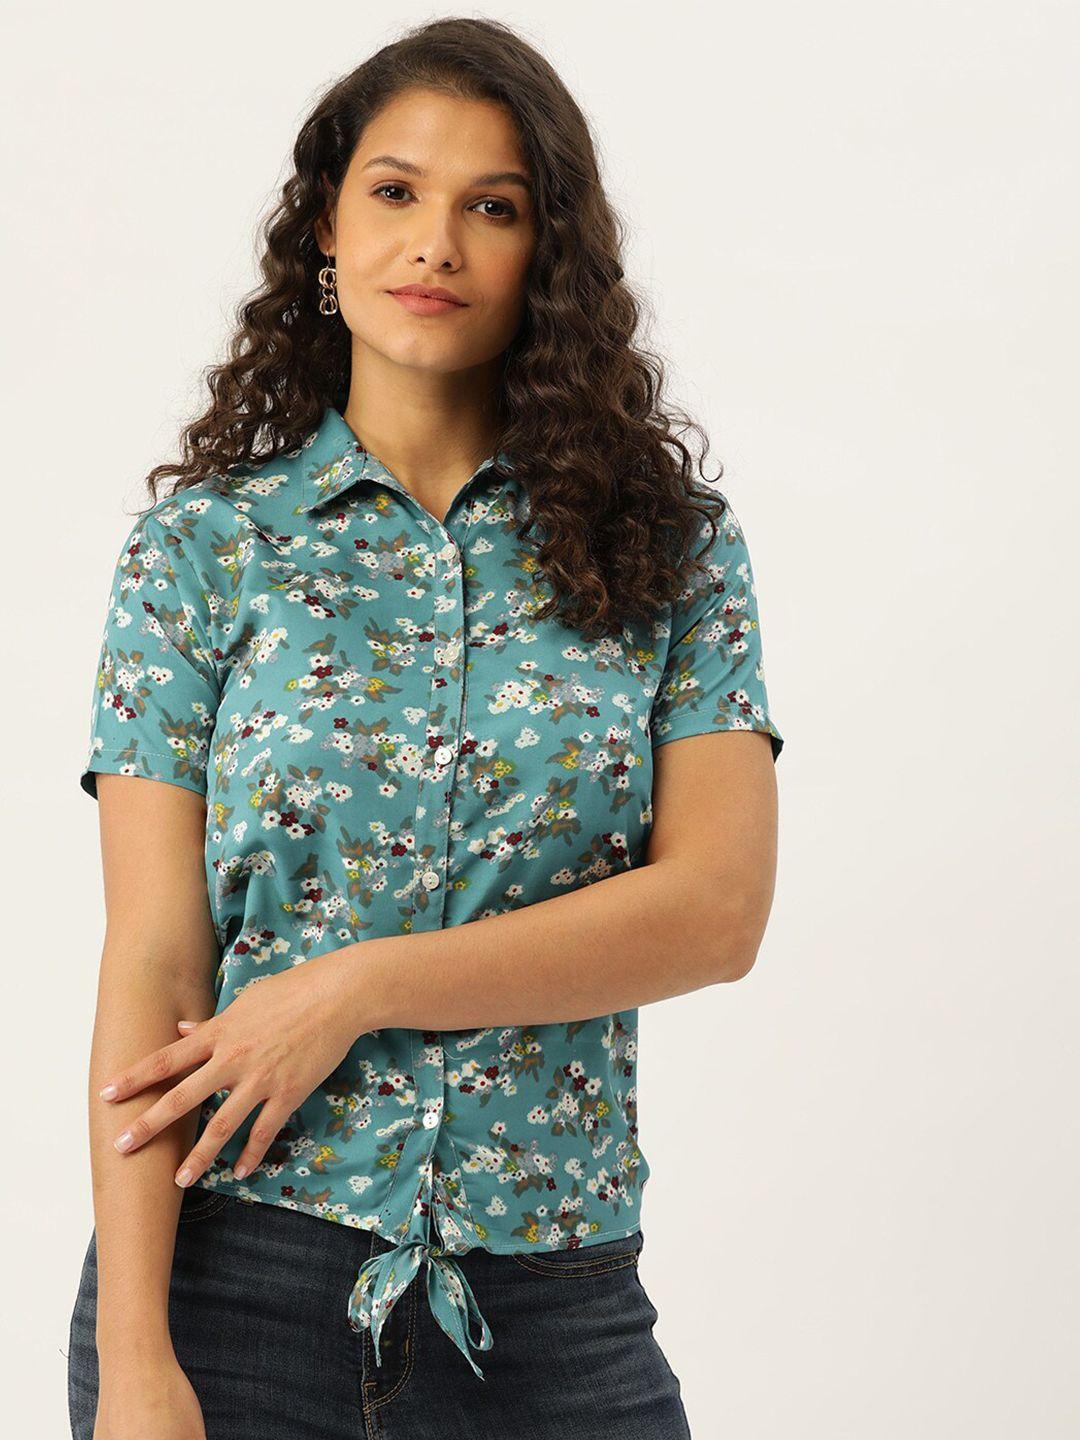 baesd-floral-printed-shirt-style-top